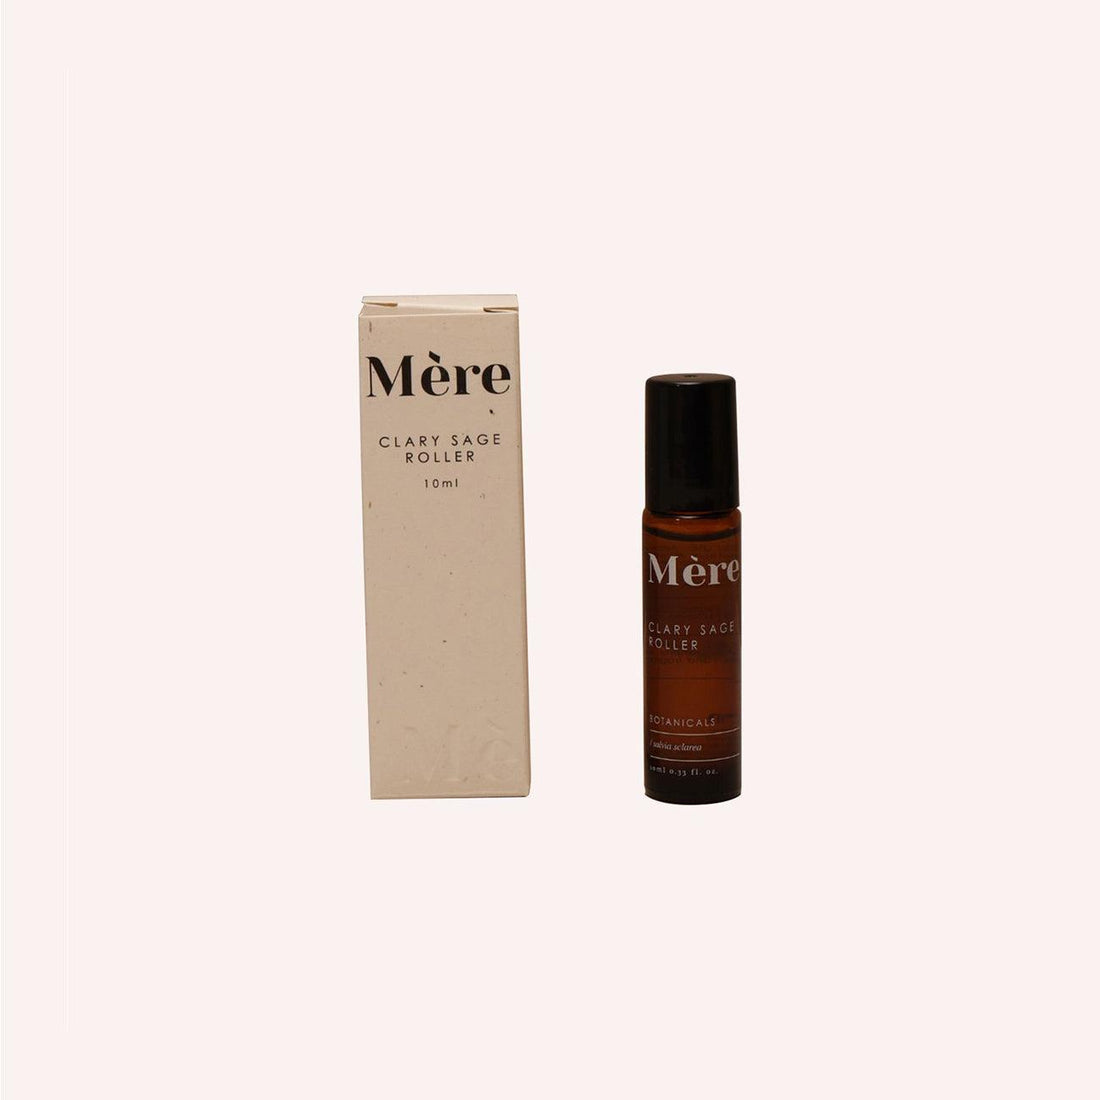 Clary Sage Roller 10ml